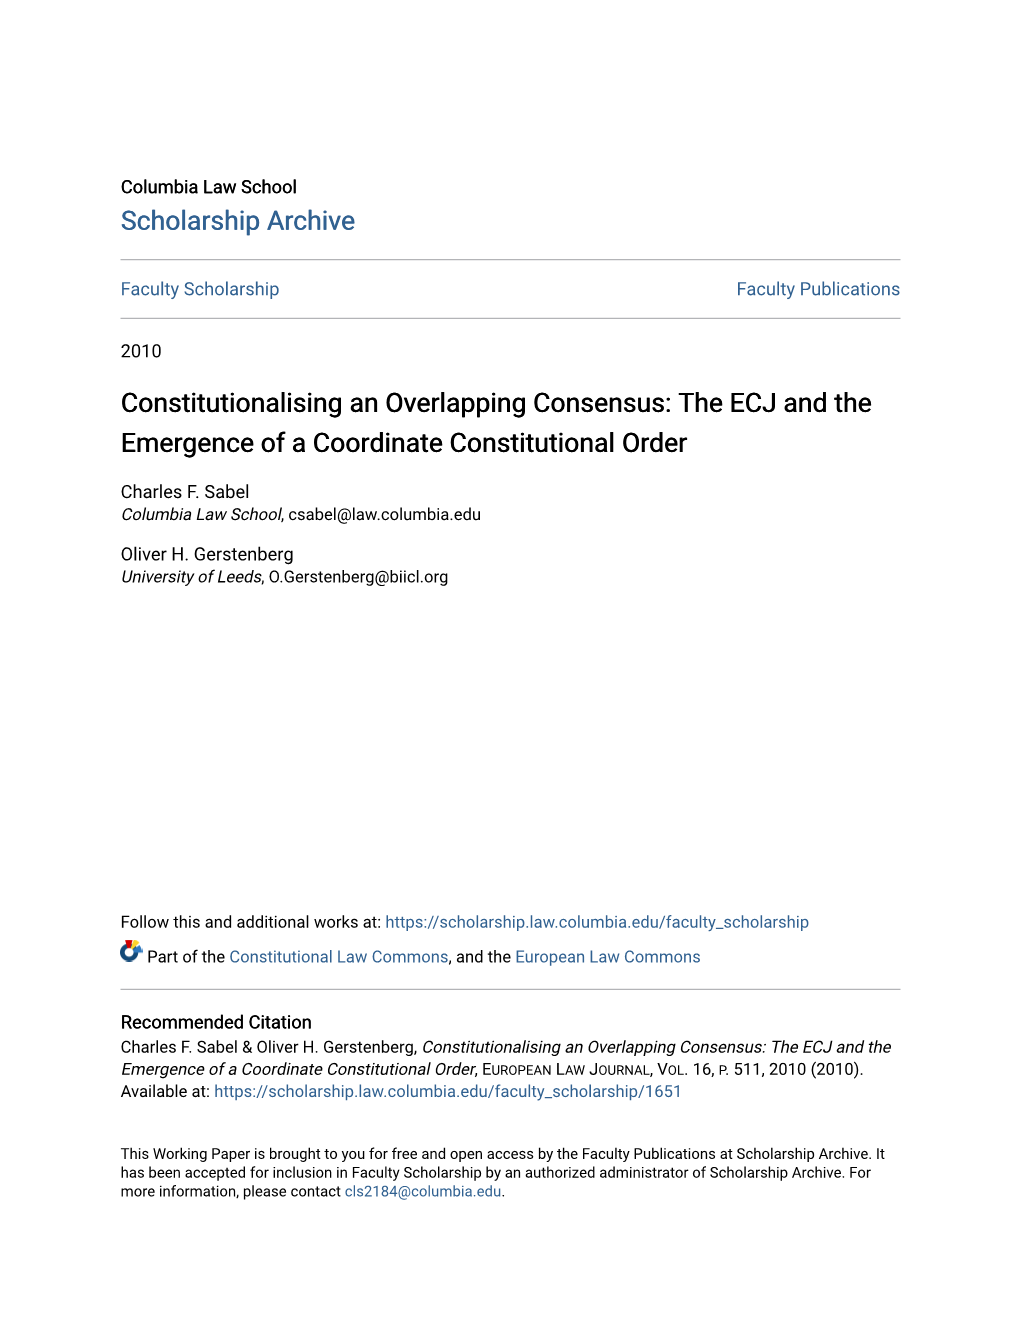 Constitutionalising an Overlapping Consensus: the ECJ and the Emergence of a Coordinate Constitutional Order